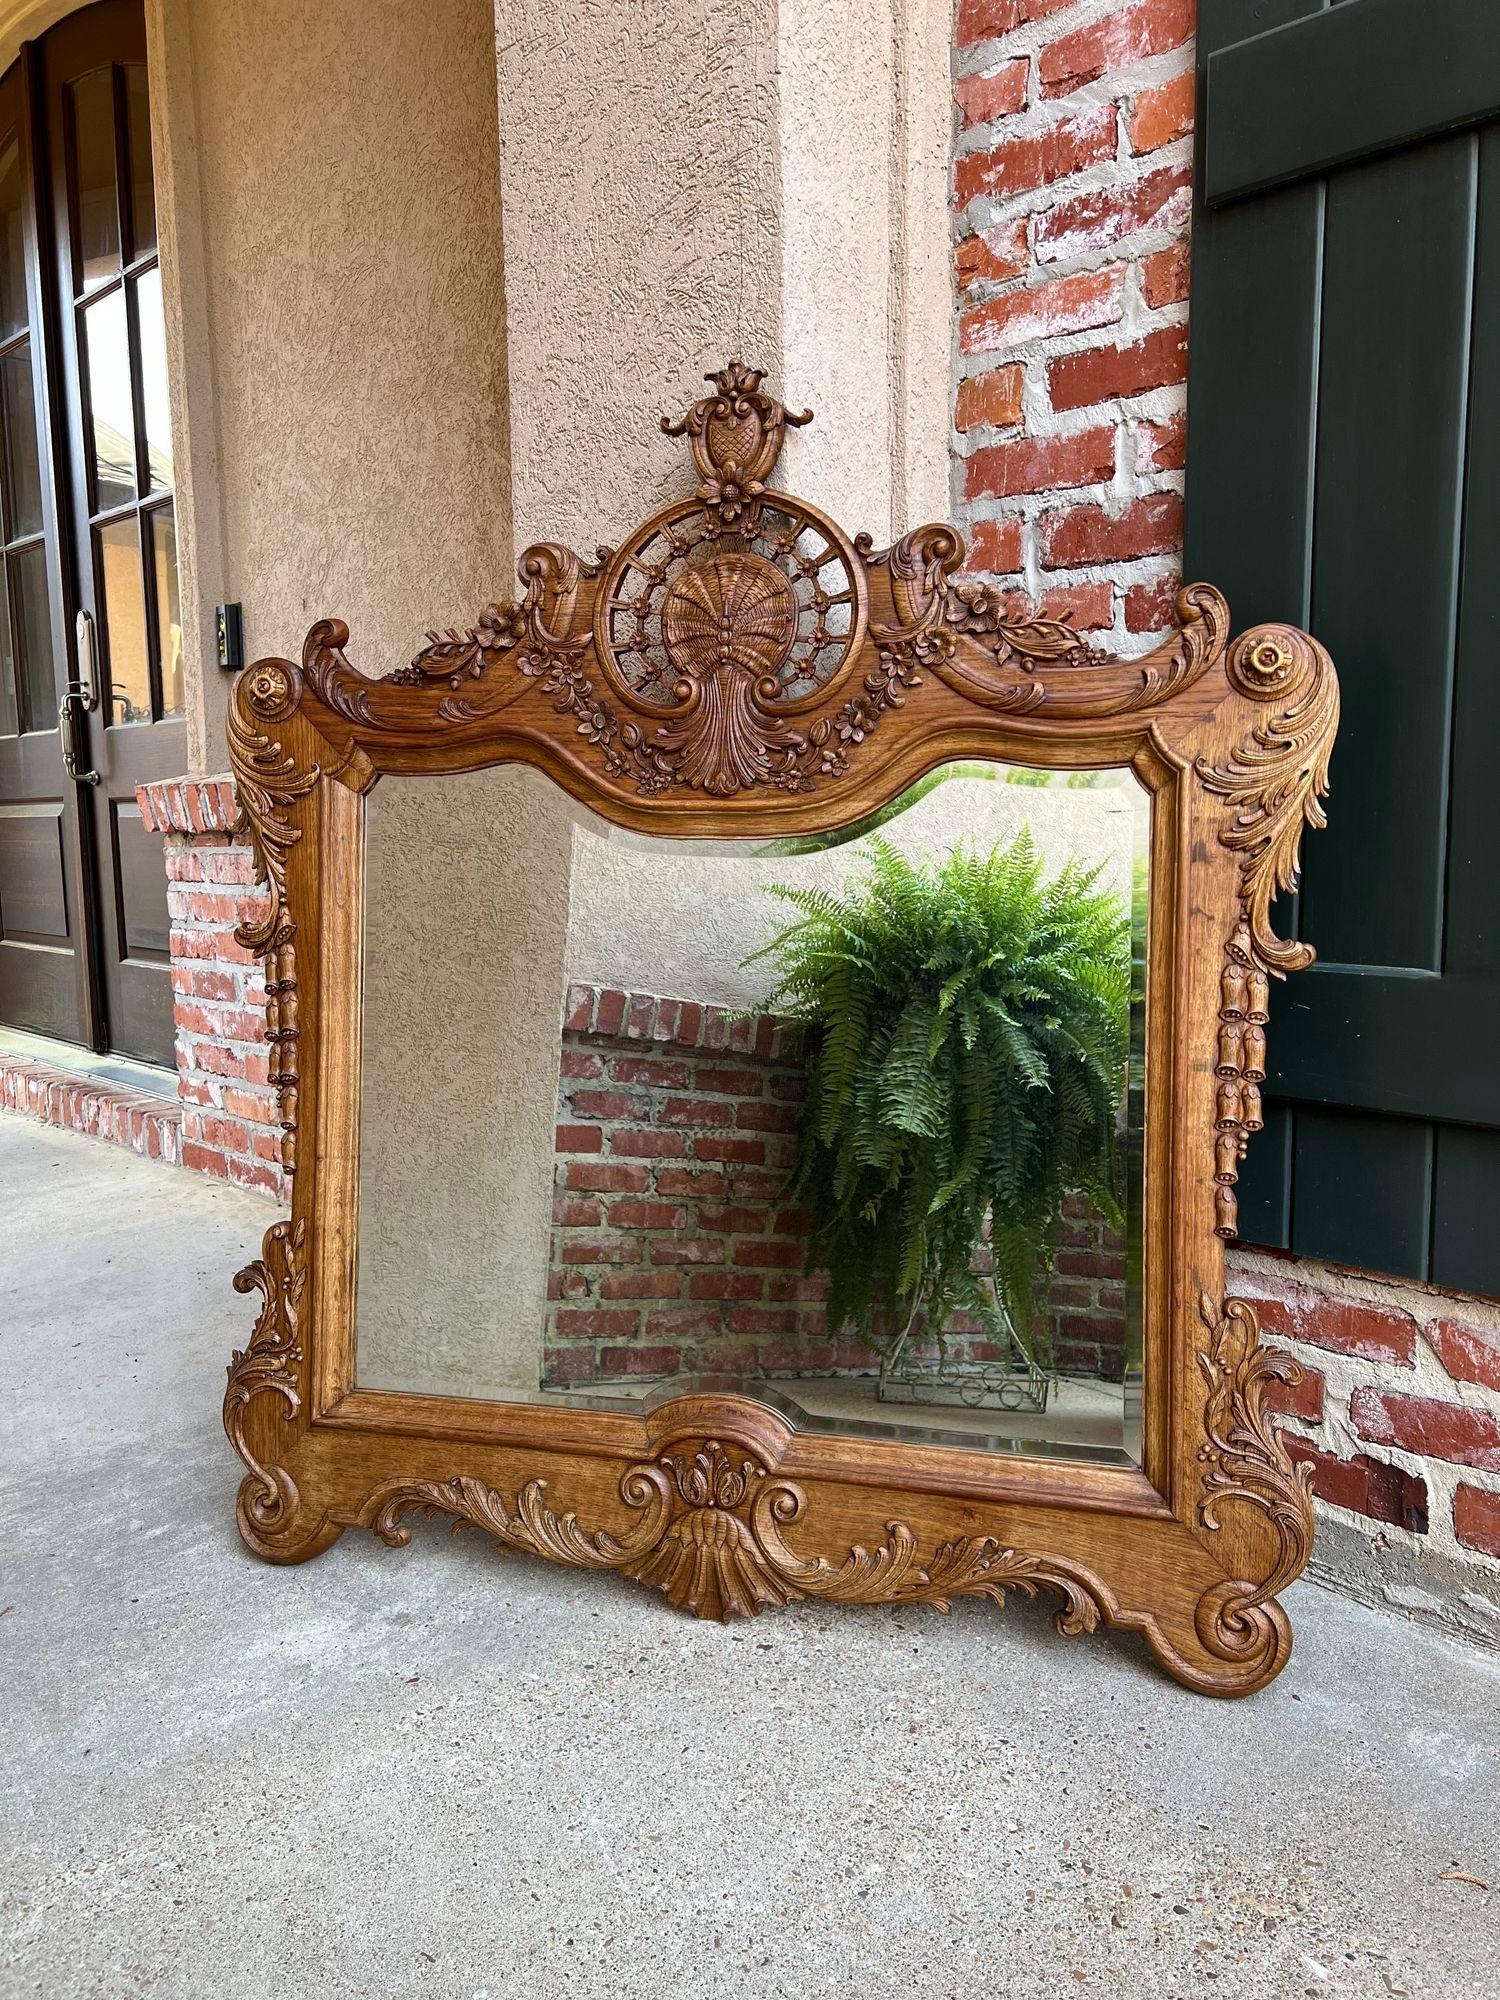 Antique French wall mirror Louis XV carved oak stripped Finish 19th century.

Direct from France, a beautifully carved wall mirror with fabulous French style throughout. The intricate opening carving on the high crown include a pineapple medallion